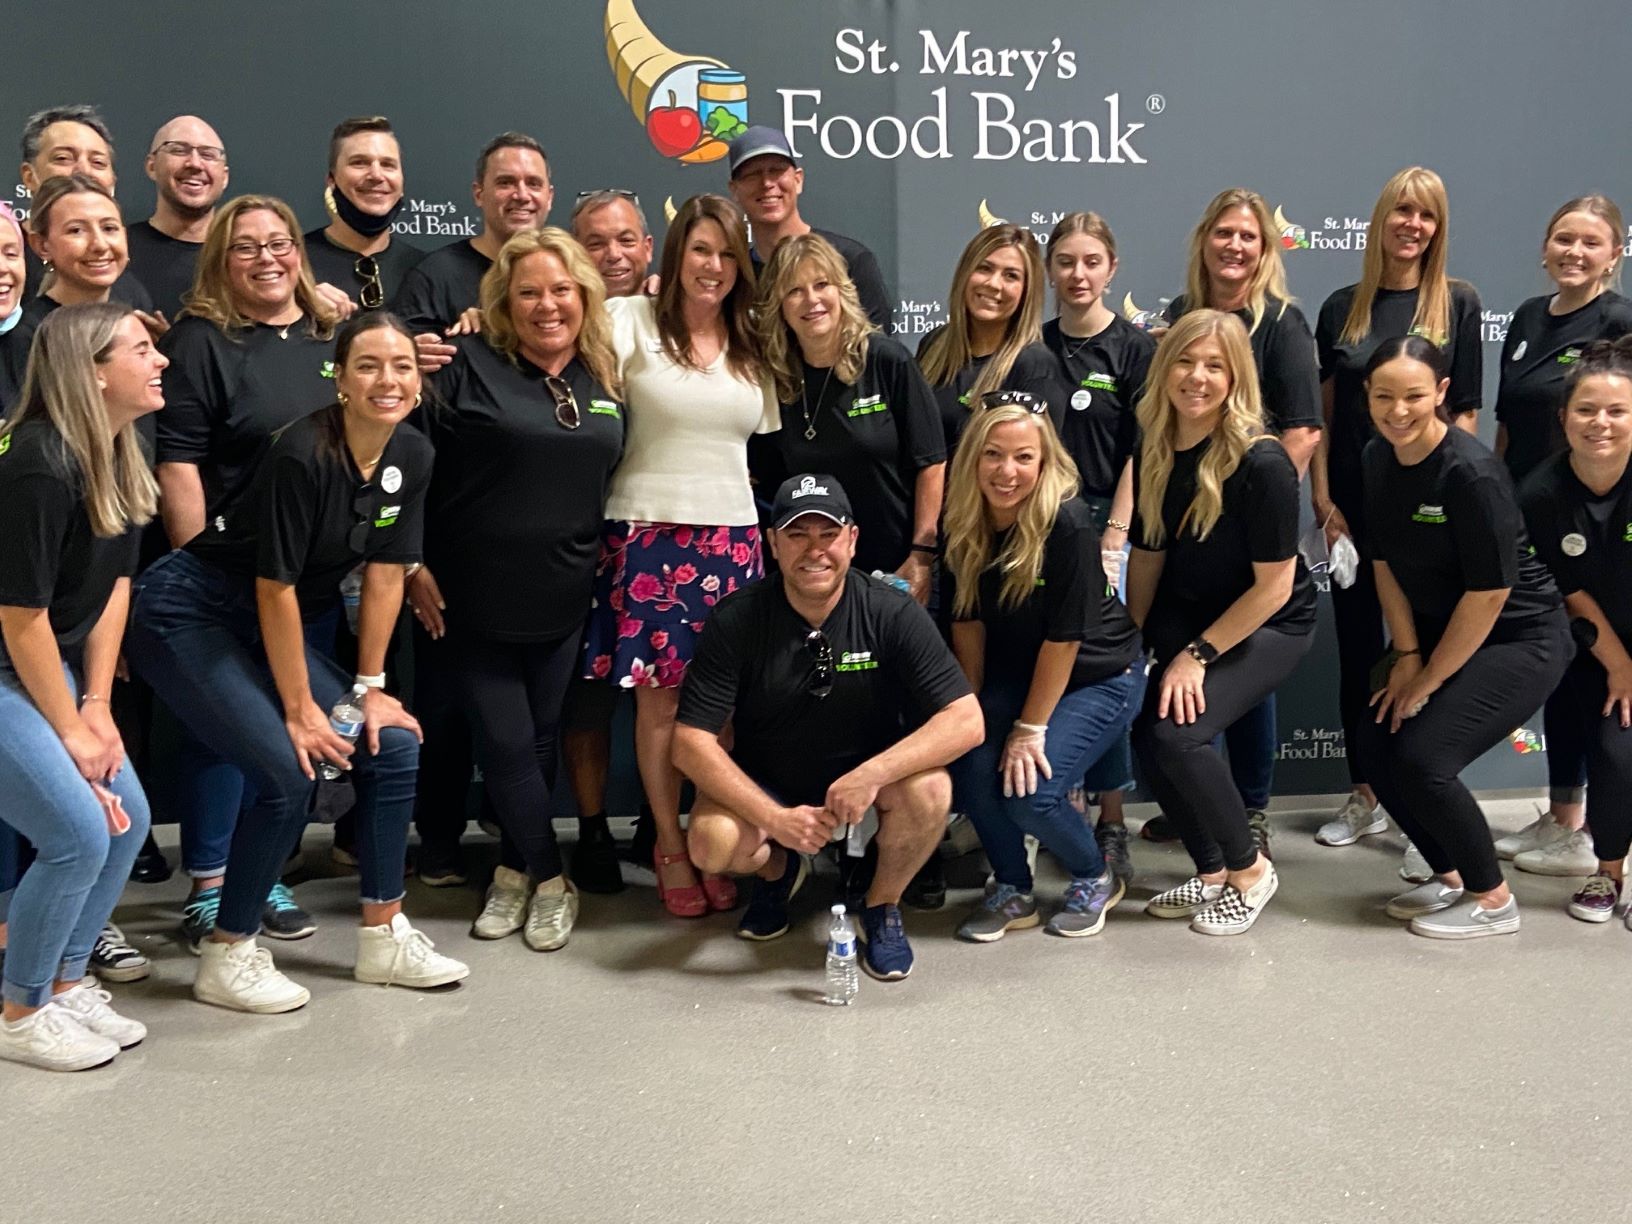 St. Mary's Food Bank Workplace Giving